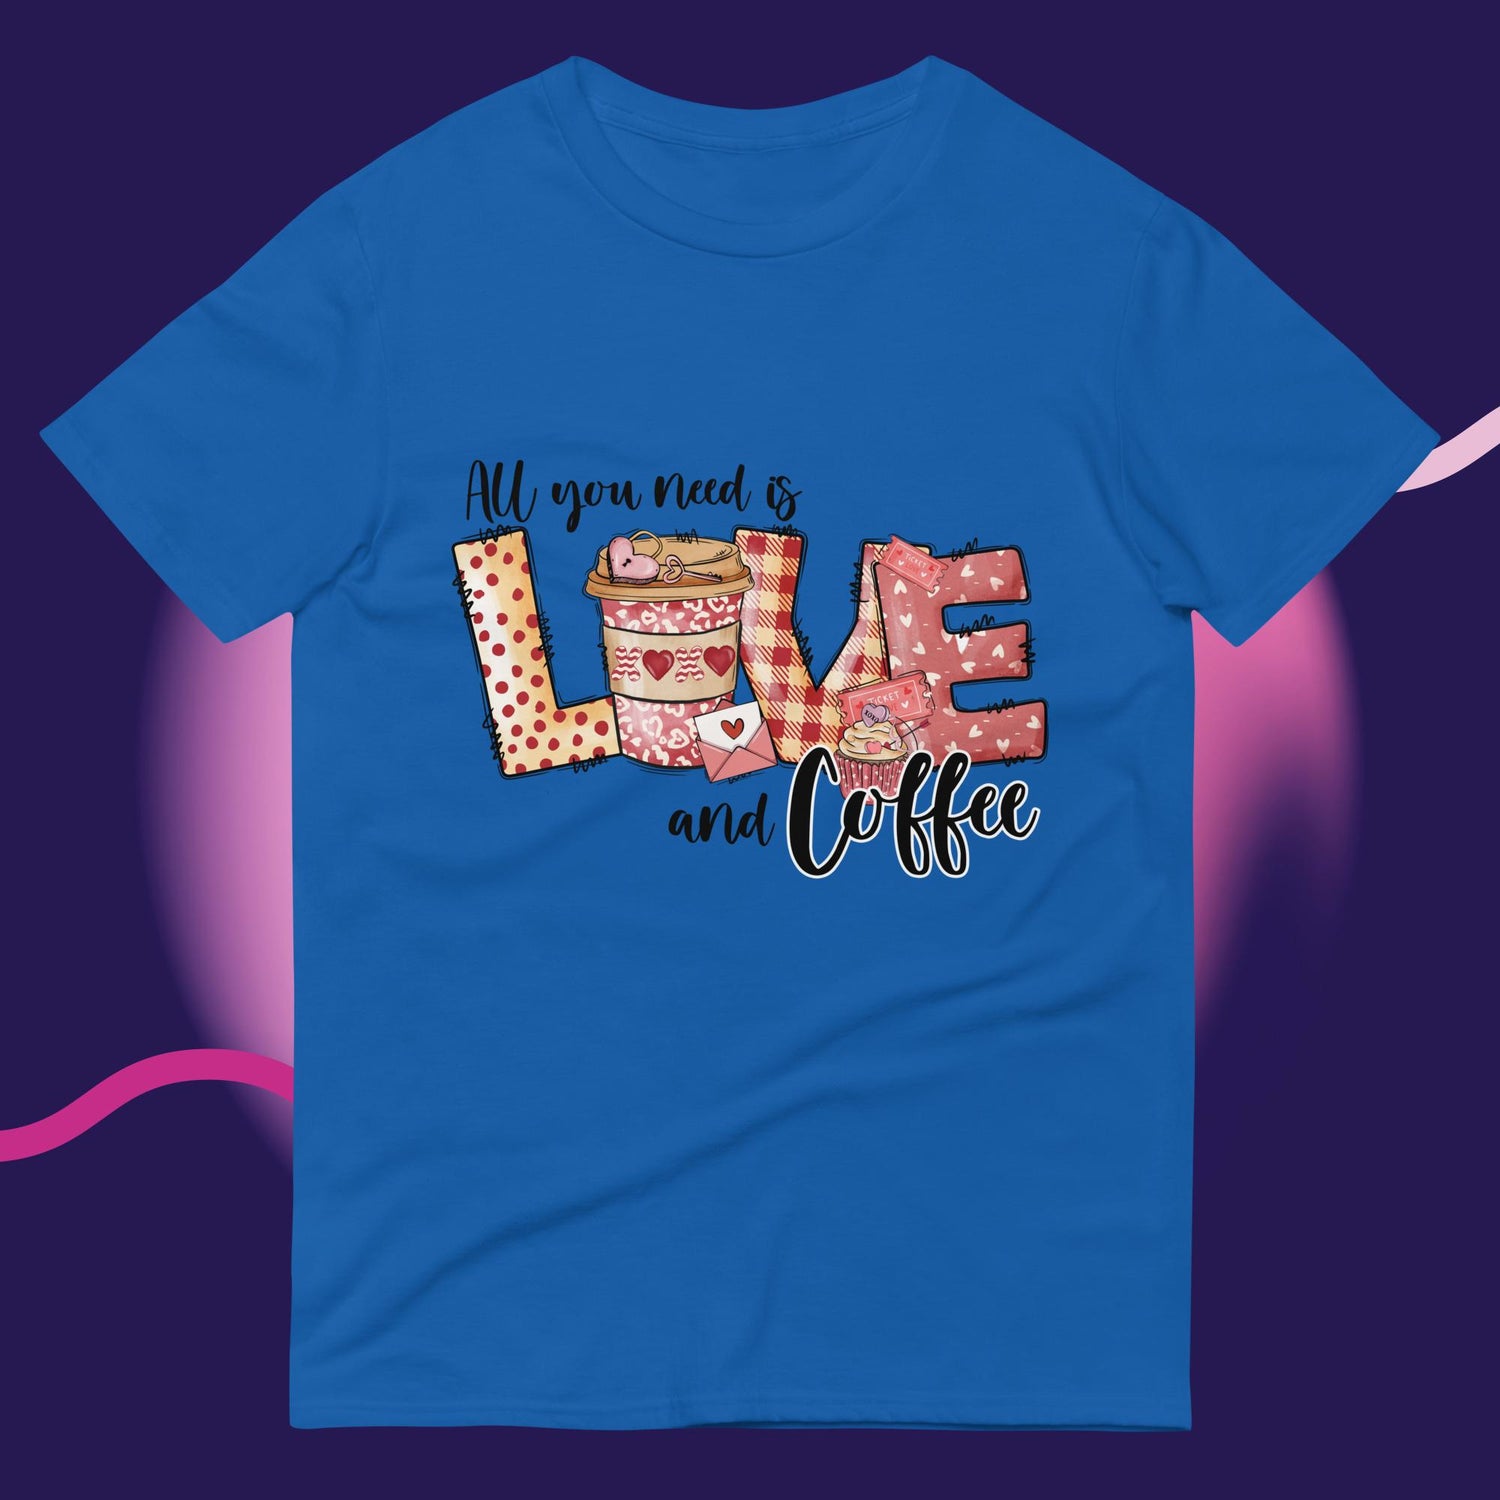 Sparkle-kiss-creations-all-you-need-is-love-coffee-t-shirt-blue